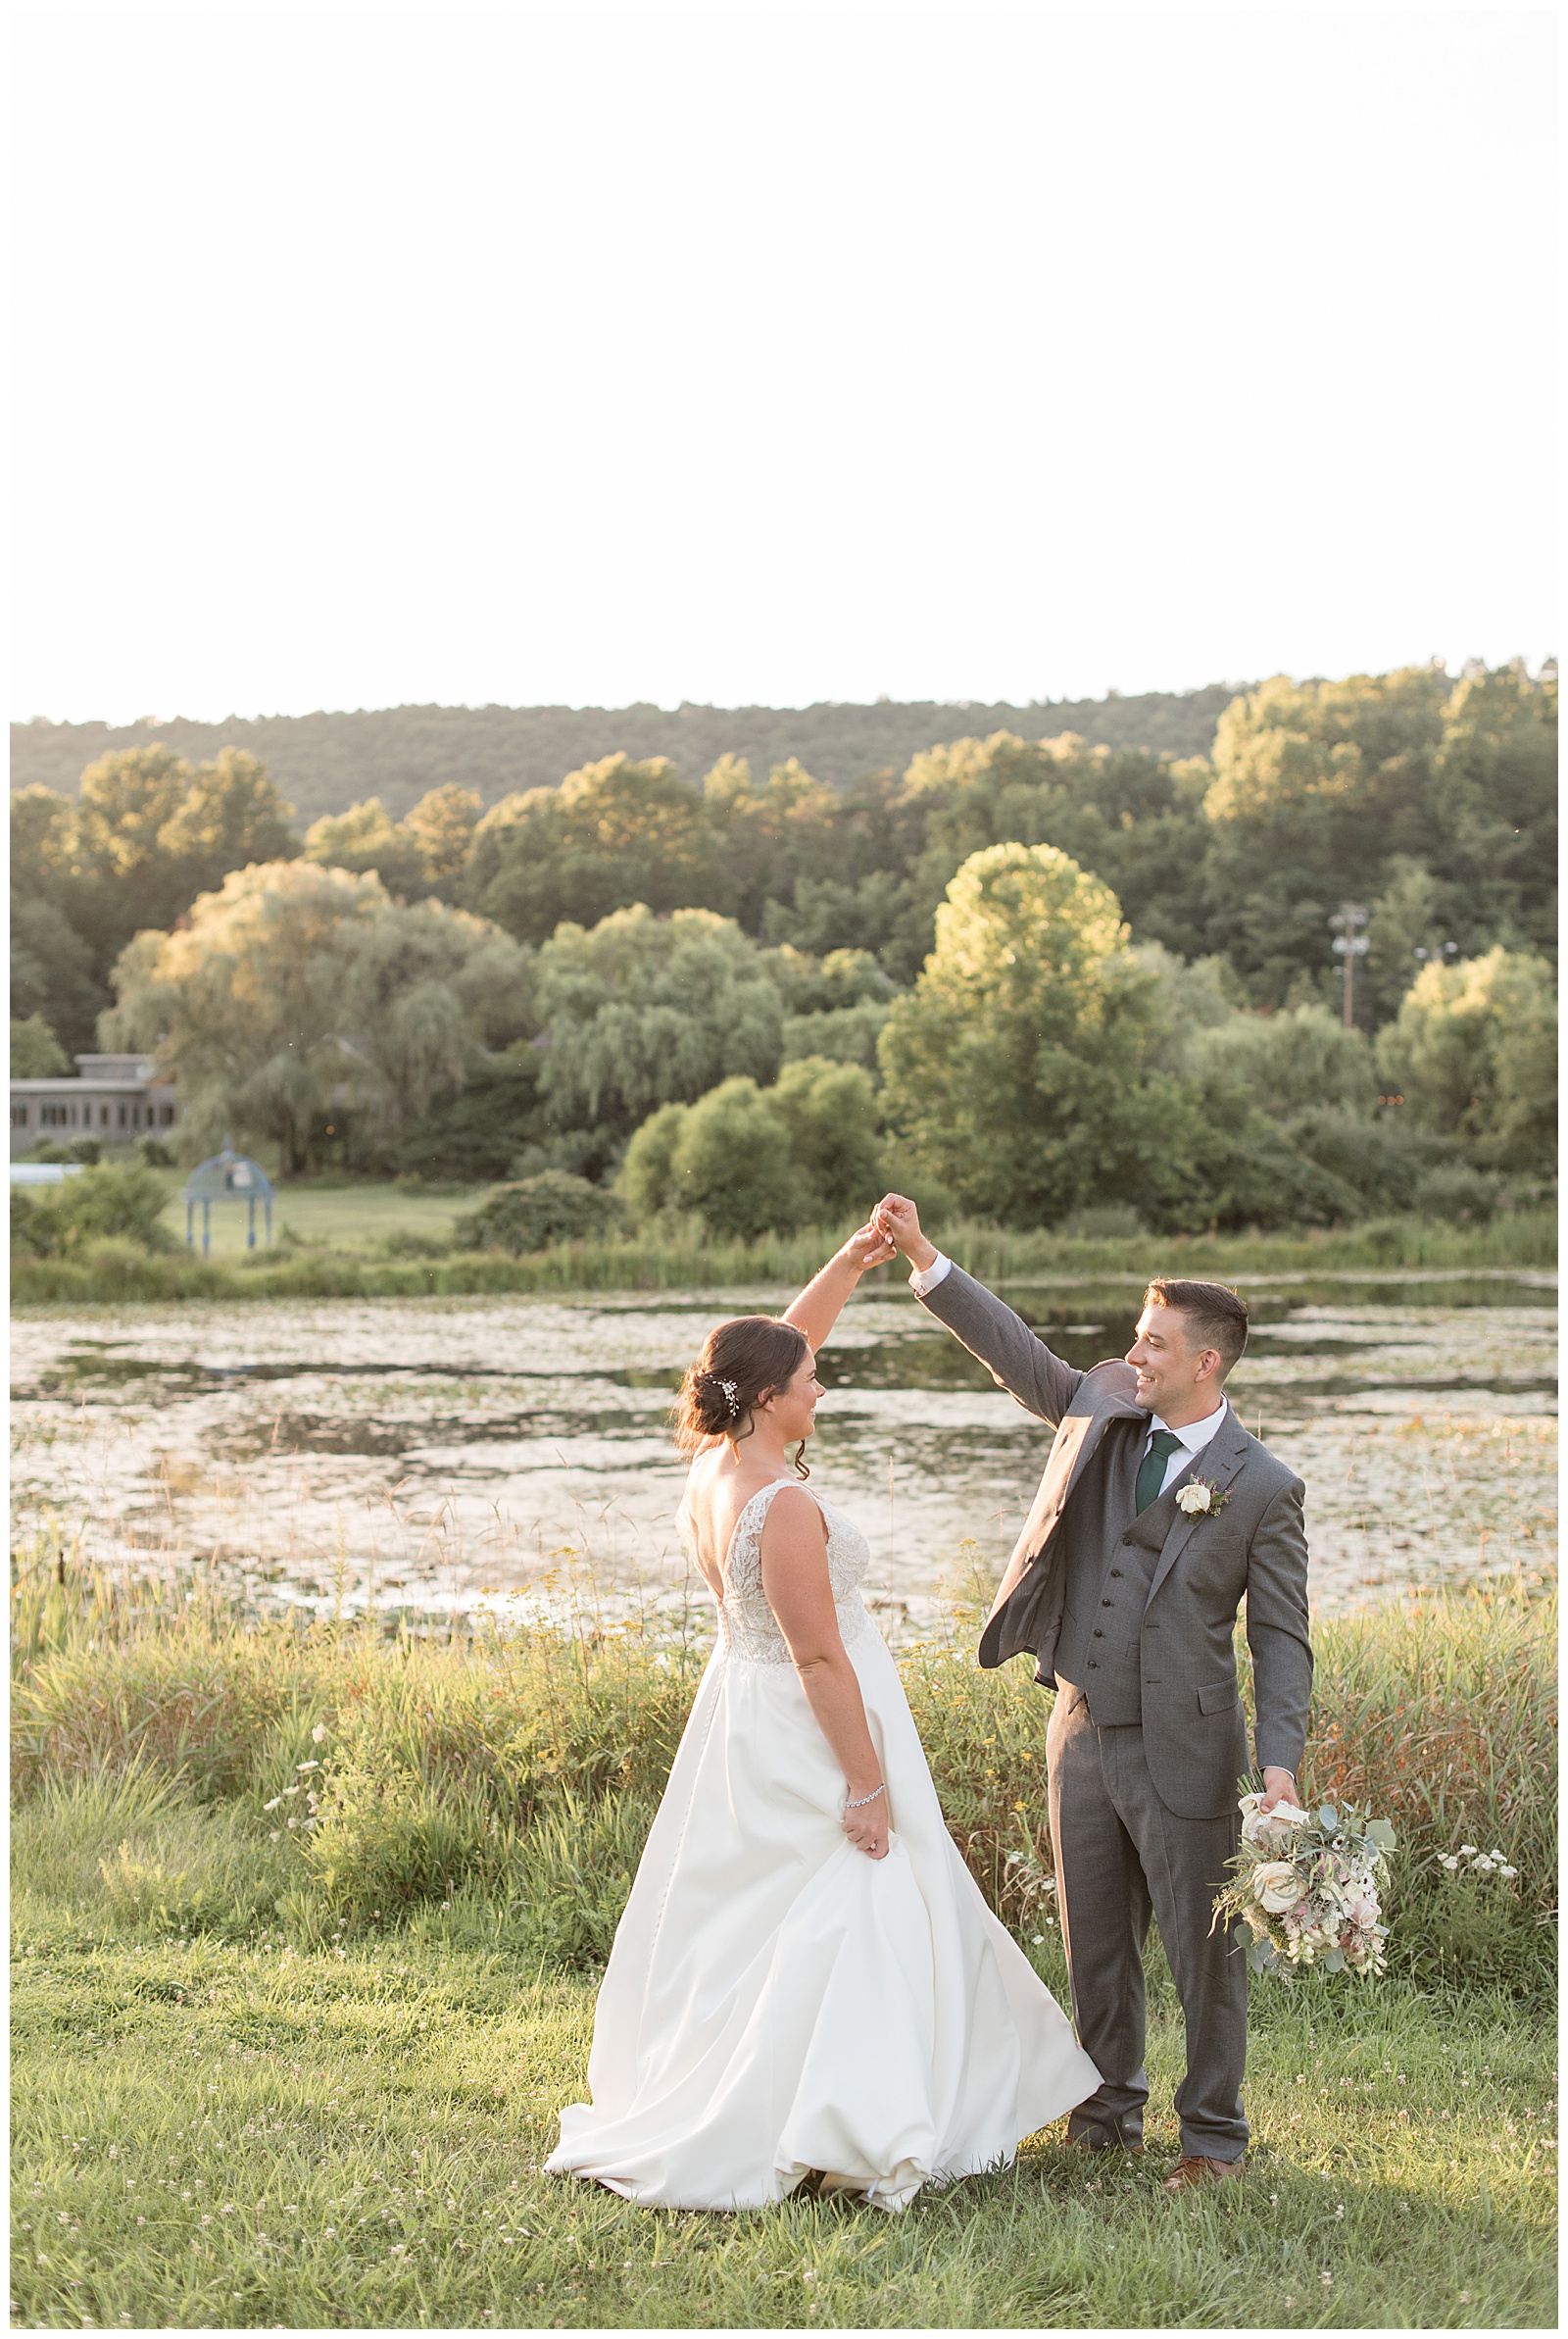 groom twirling his bride under his right hand by pond and trees at sunset in harrisburg pennsylvania